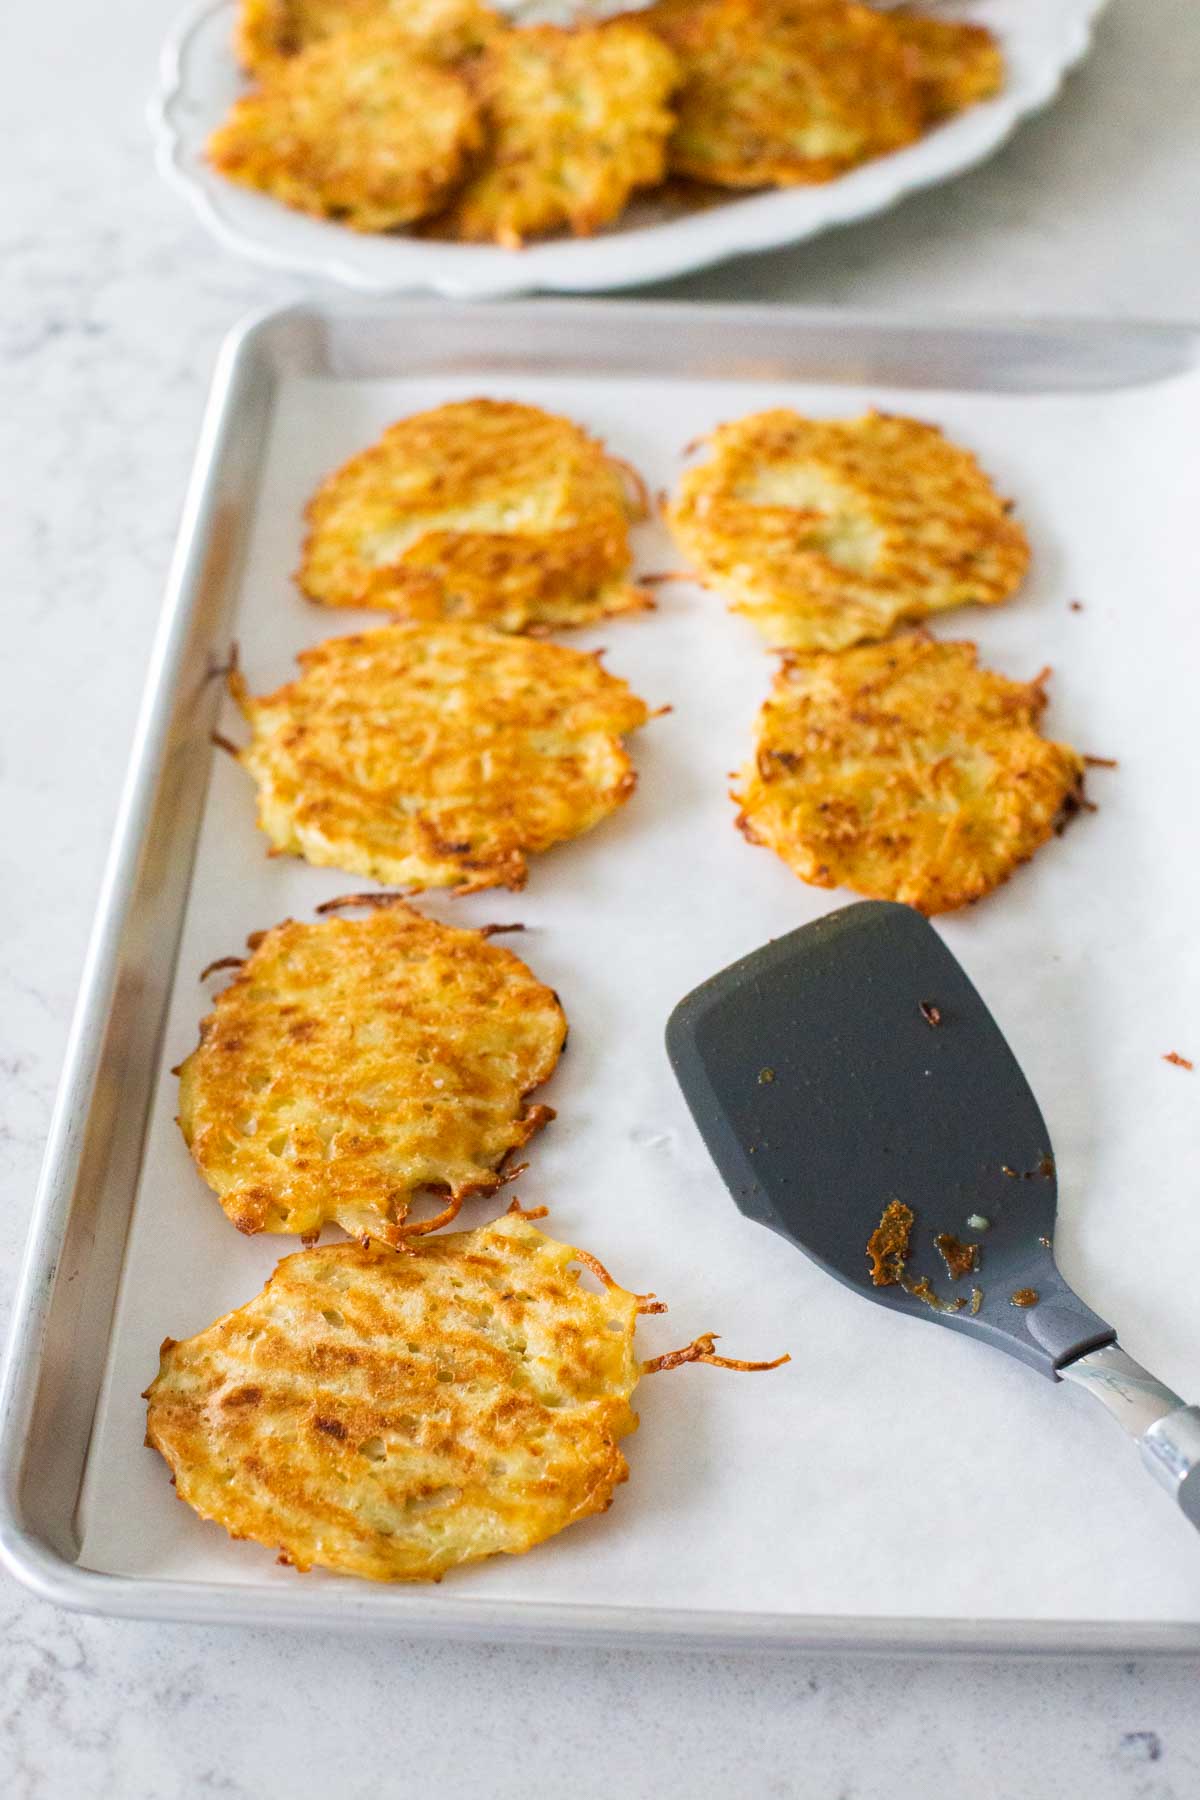 The latkes are lined up on a baking sheet with parchment paper and a spatula.